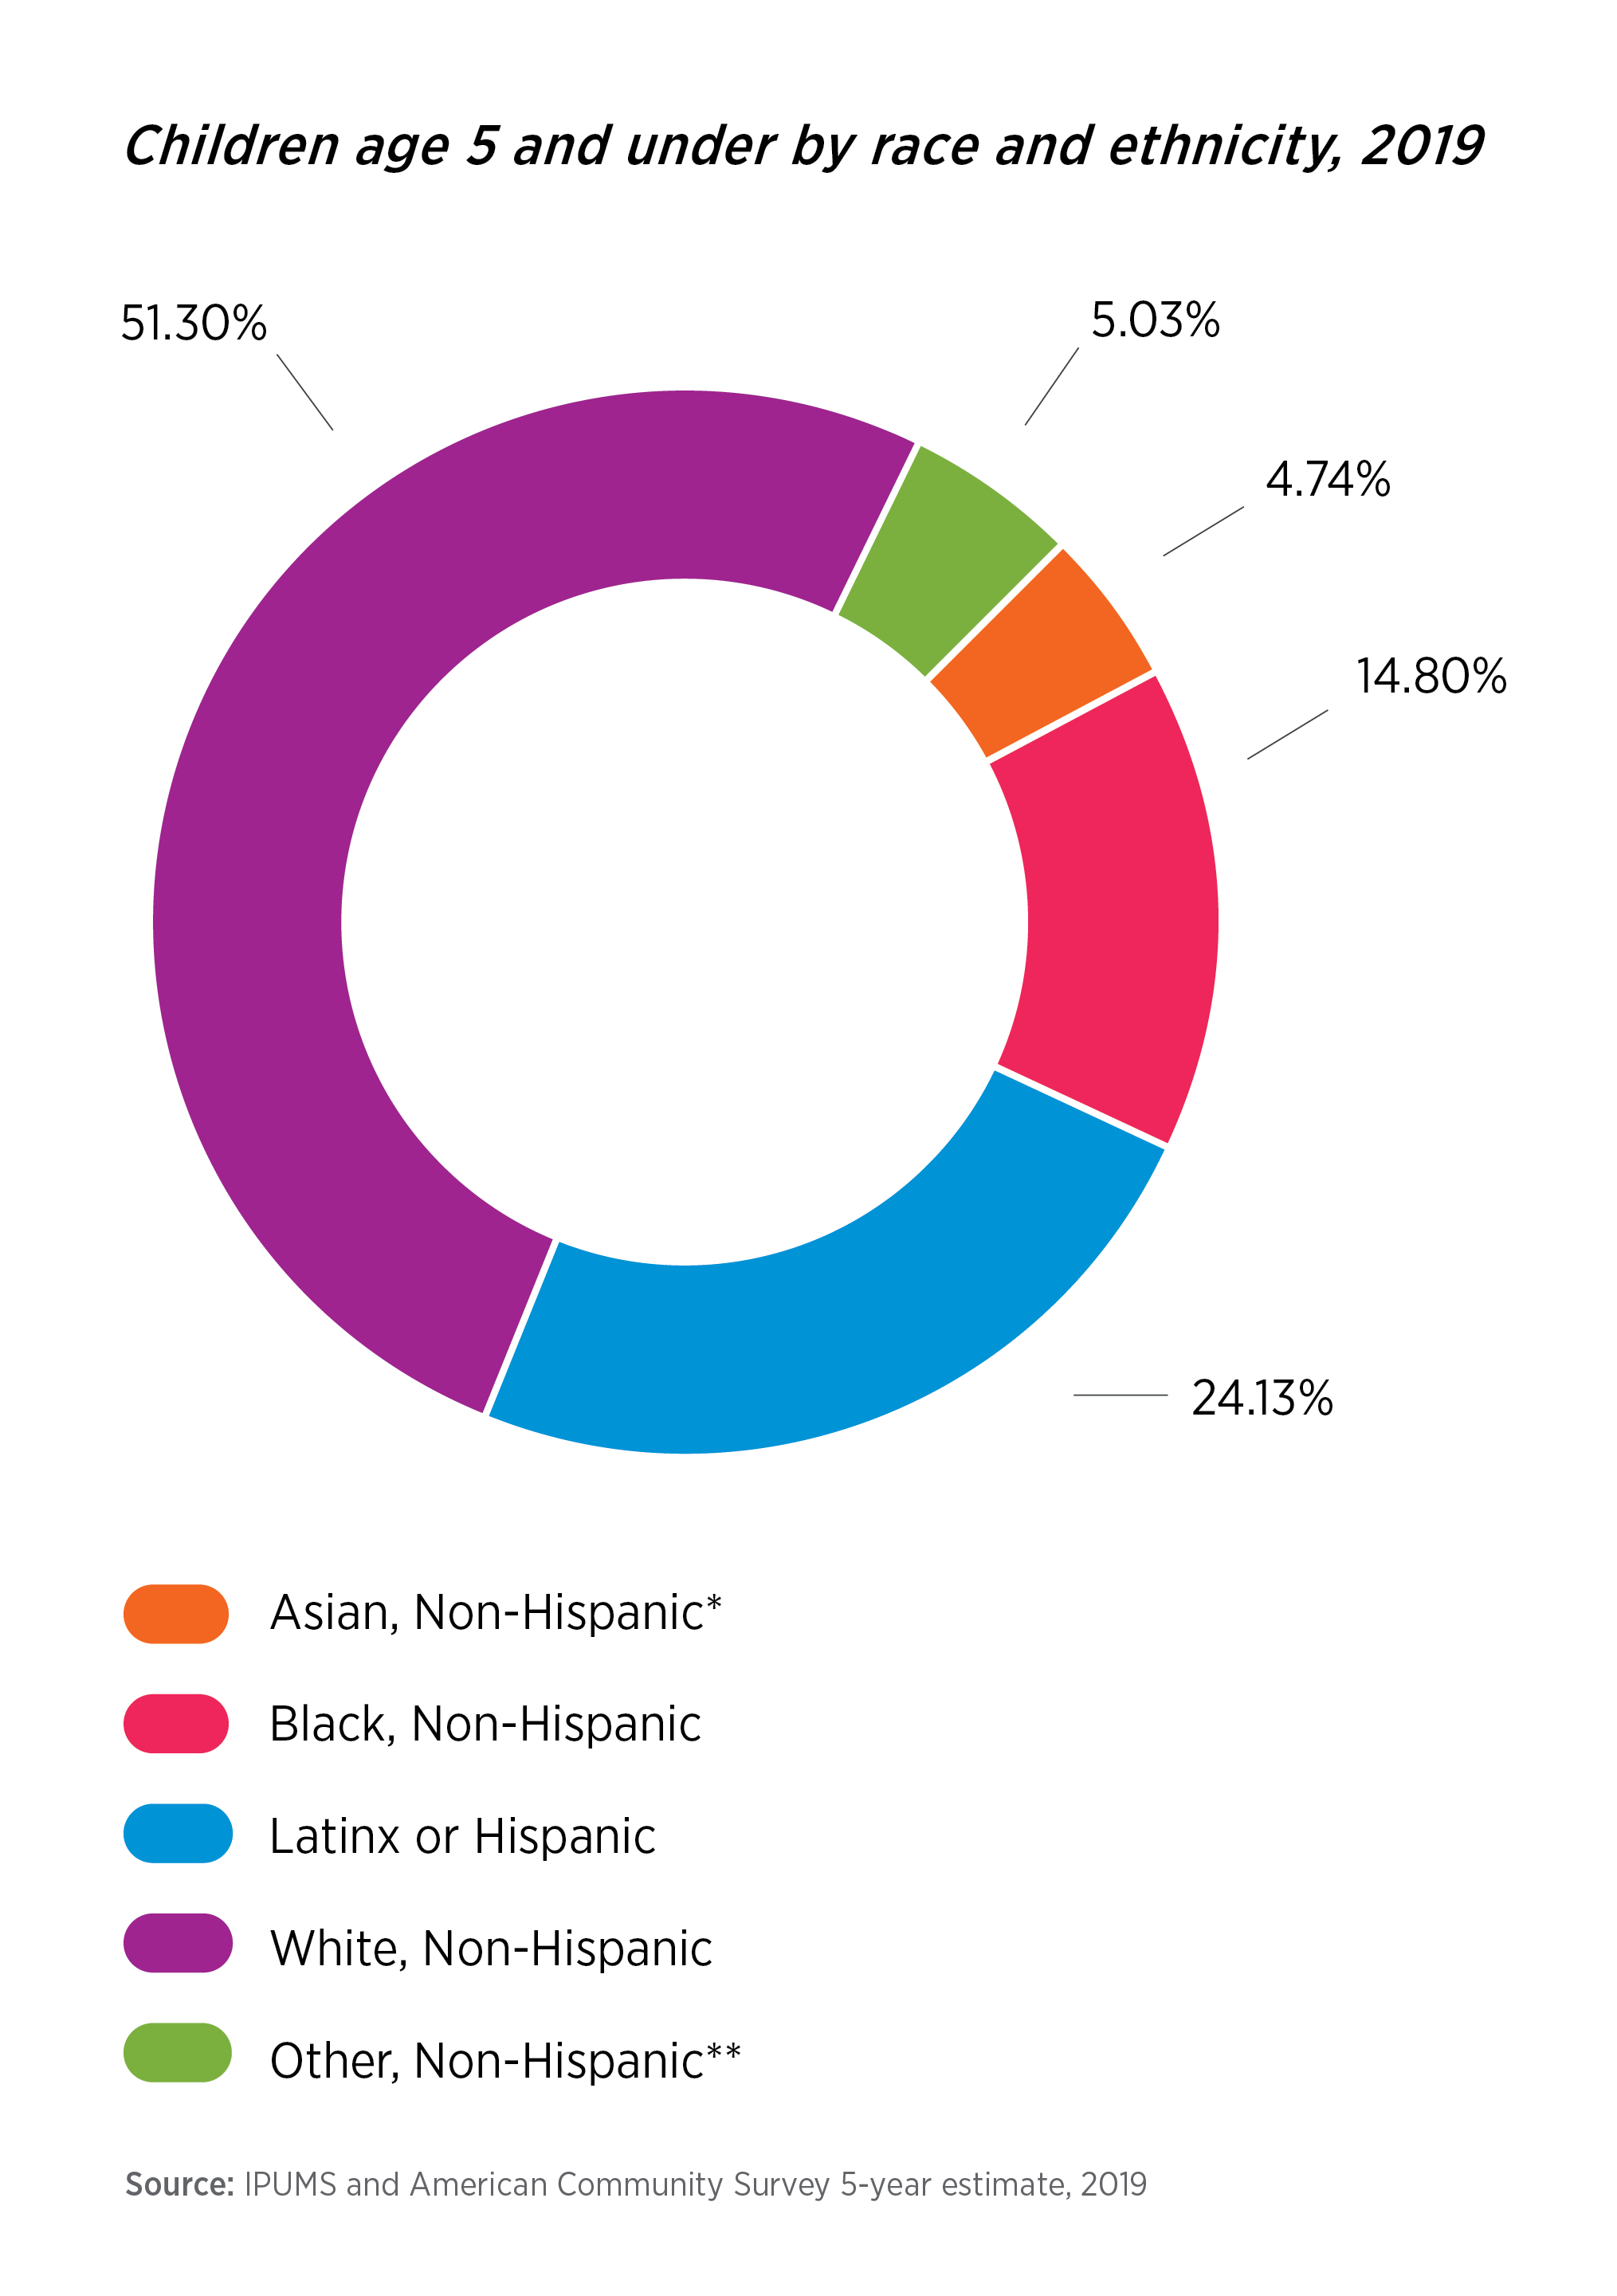 Children age 5 and under in Illinois by race and ethnicity, 2019